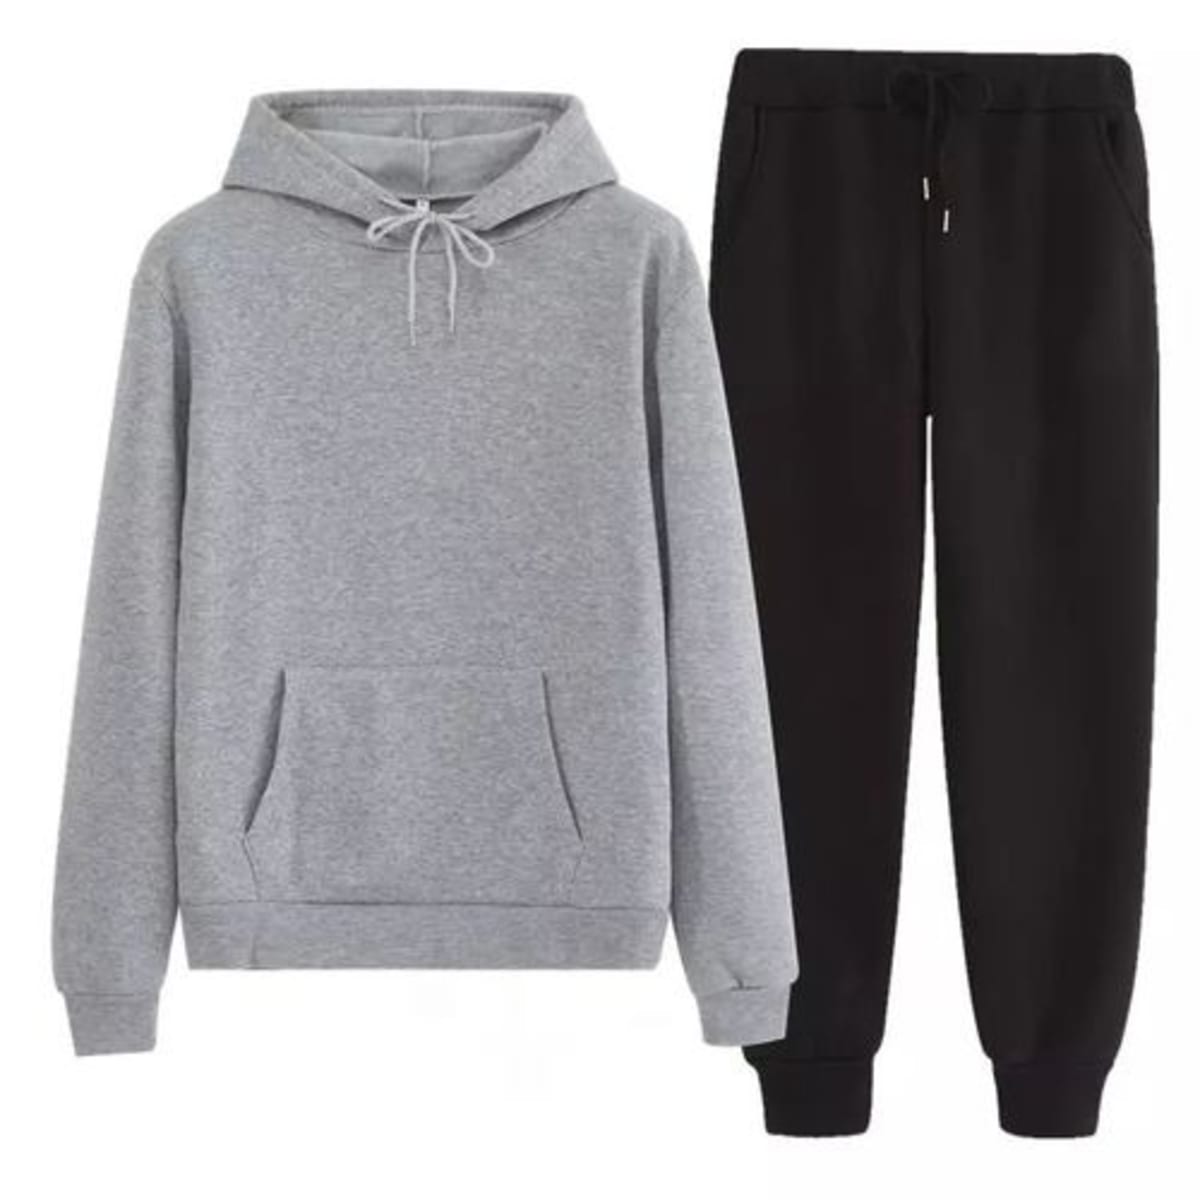 grey joggers with black hoodie - OFF-67% >Free Delivery